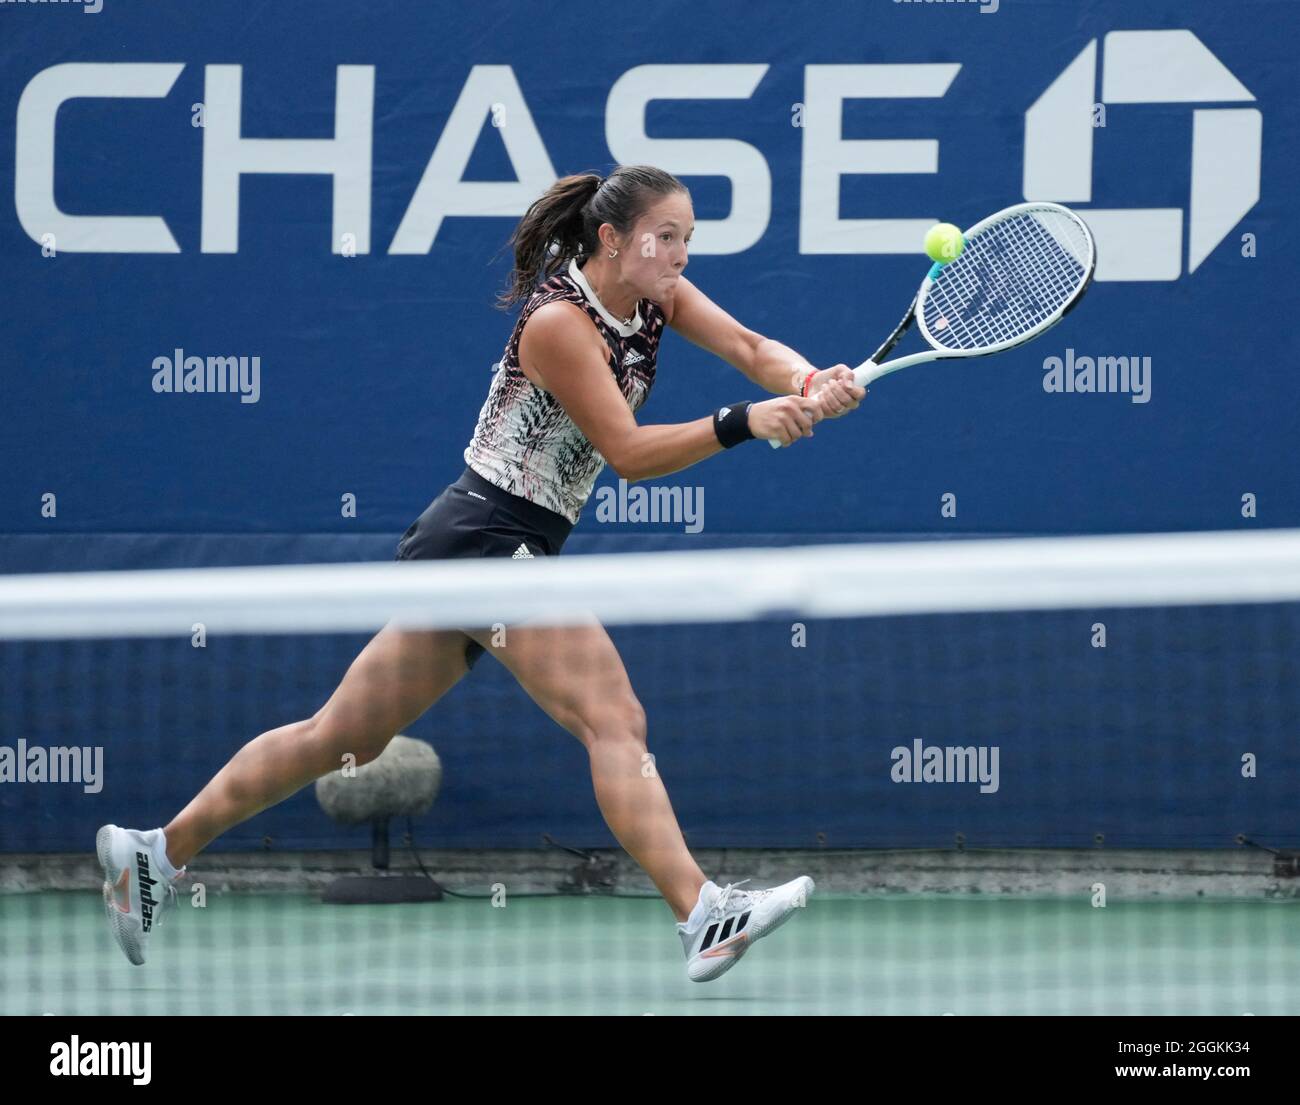 Flushing, Queens, New York, USA. 1st Sep, 2021. Daria Kasatkina (RUS)  defeated Marketa Vondrousova (CZE) 3-6, 6-4, 6-4, at the US Open being  played at Billy Jean King Ntional Tennis Center in